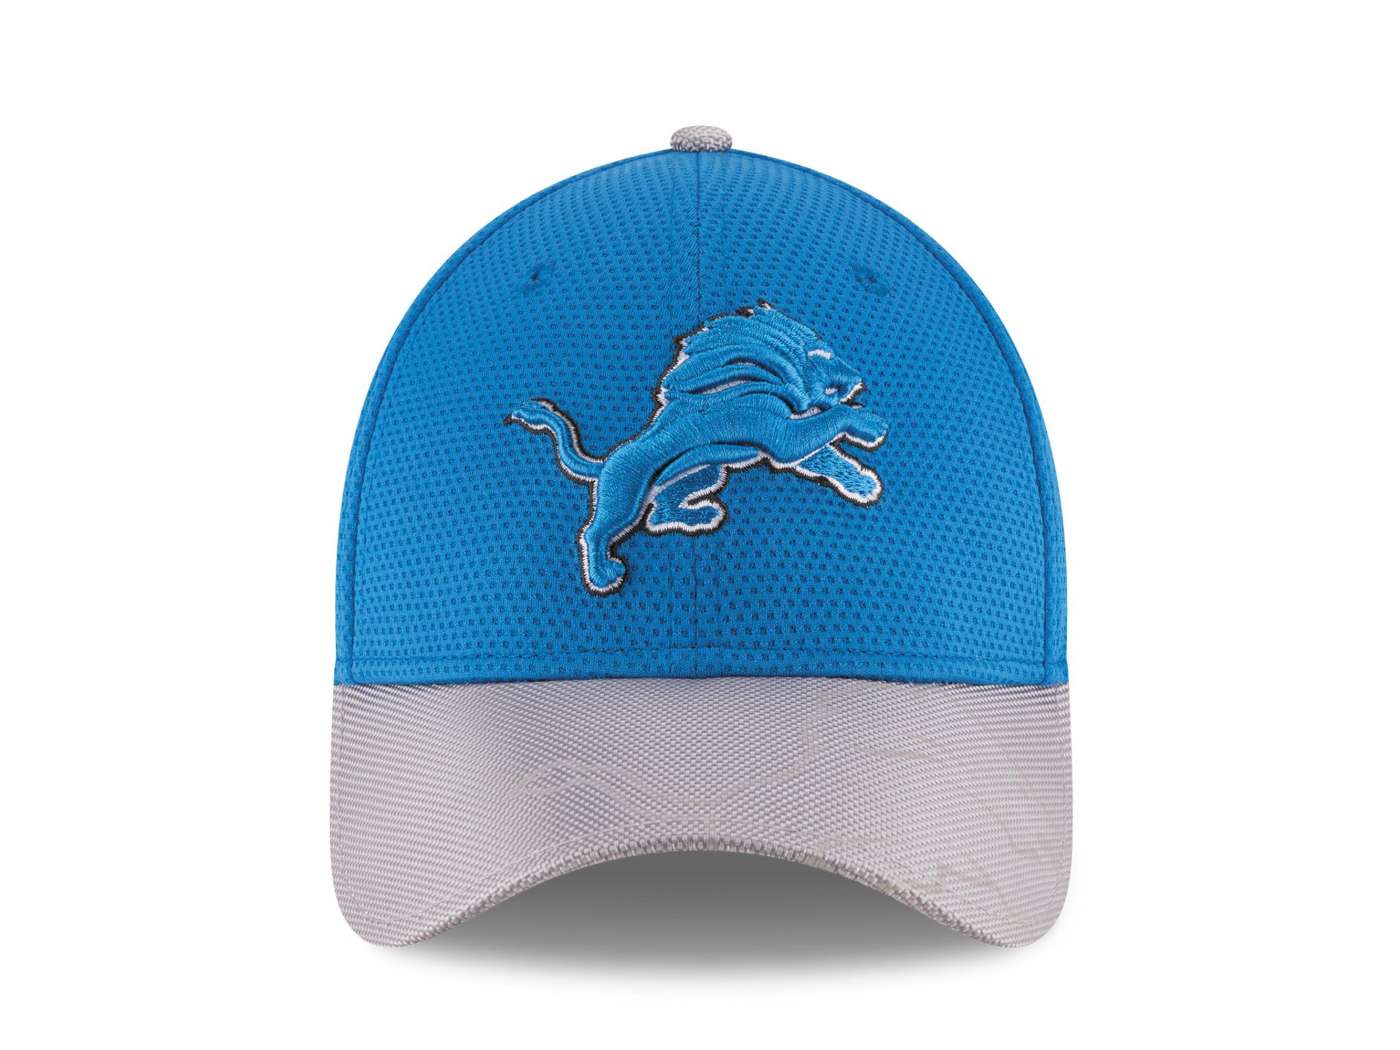 Hat NFL Detroit Lions Blue Sideline Official 39THIRTY MAINAN JEBO